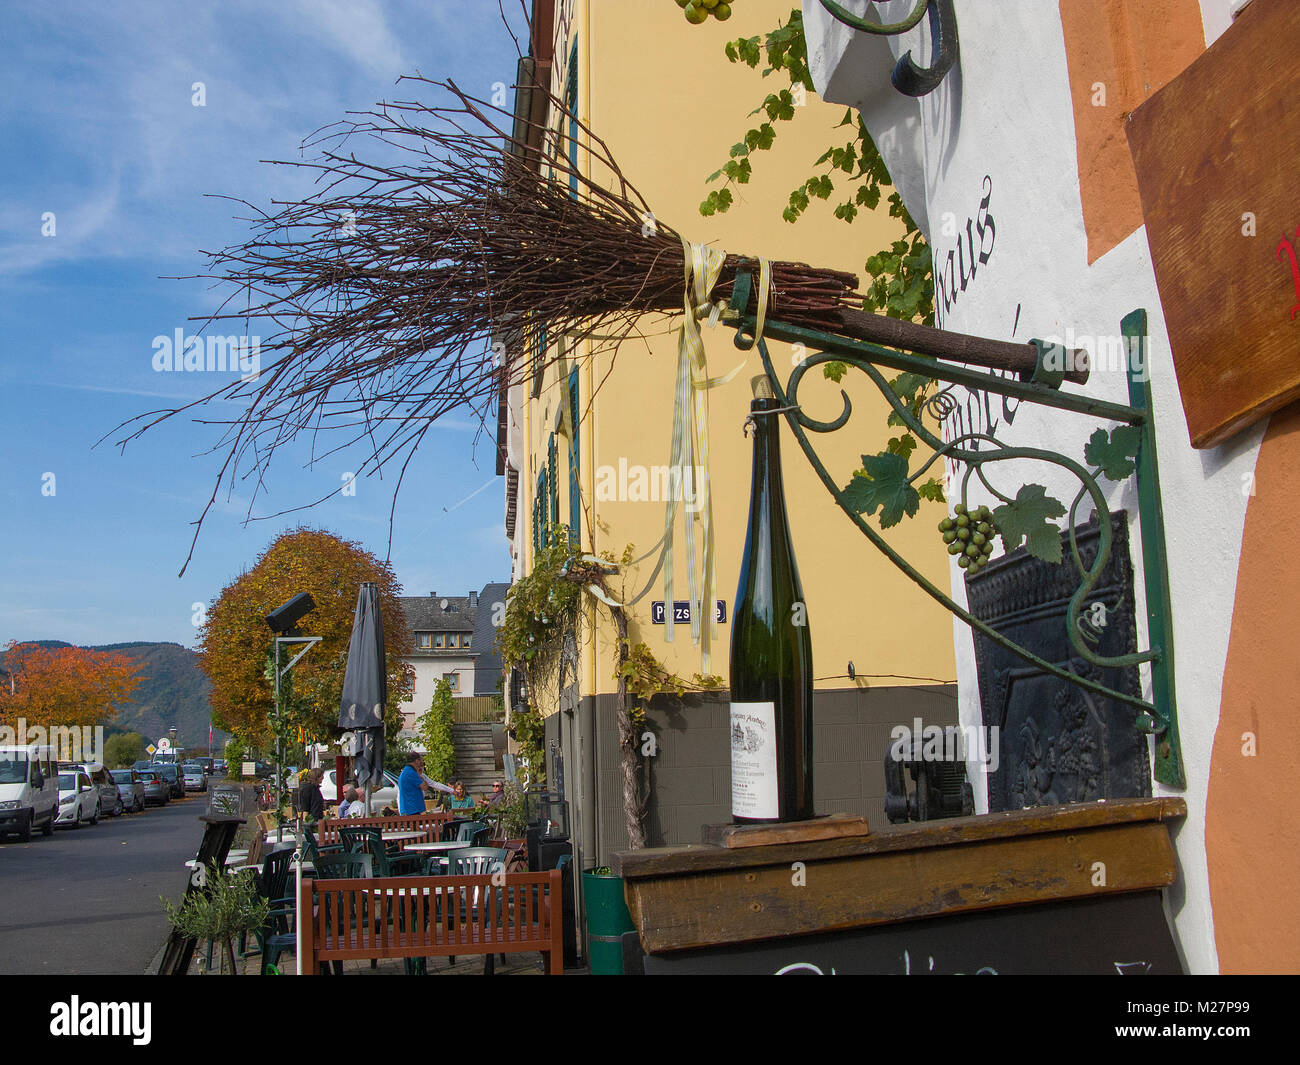 The Broom is a symbol for a wine tavern which selling homegrown wine, wine village Ediger-Eller, Rhineland-Palatinate, Germany, Europe Stock Photo